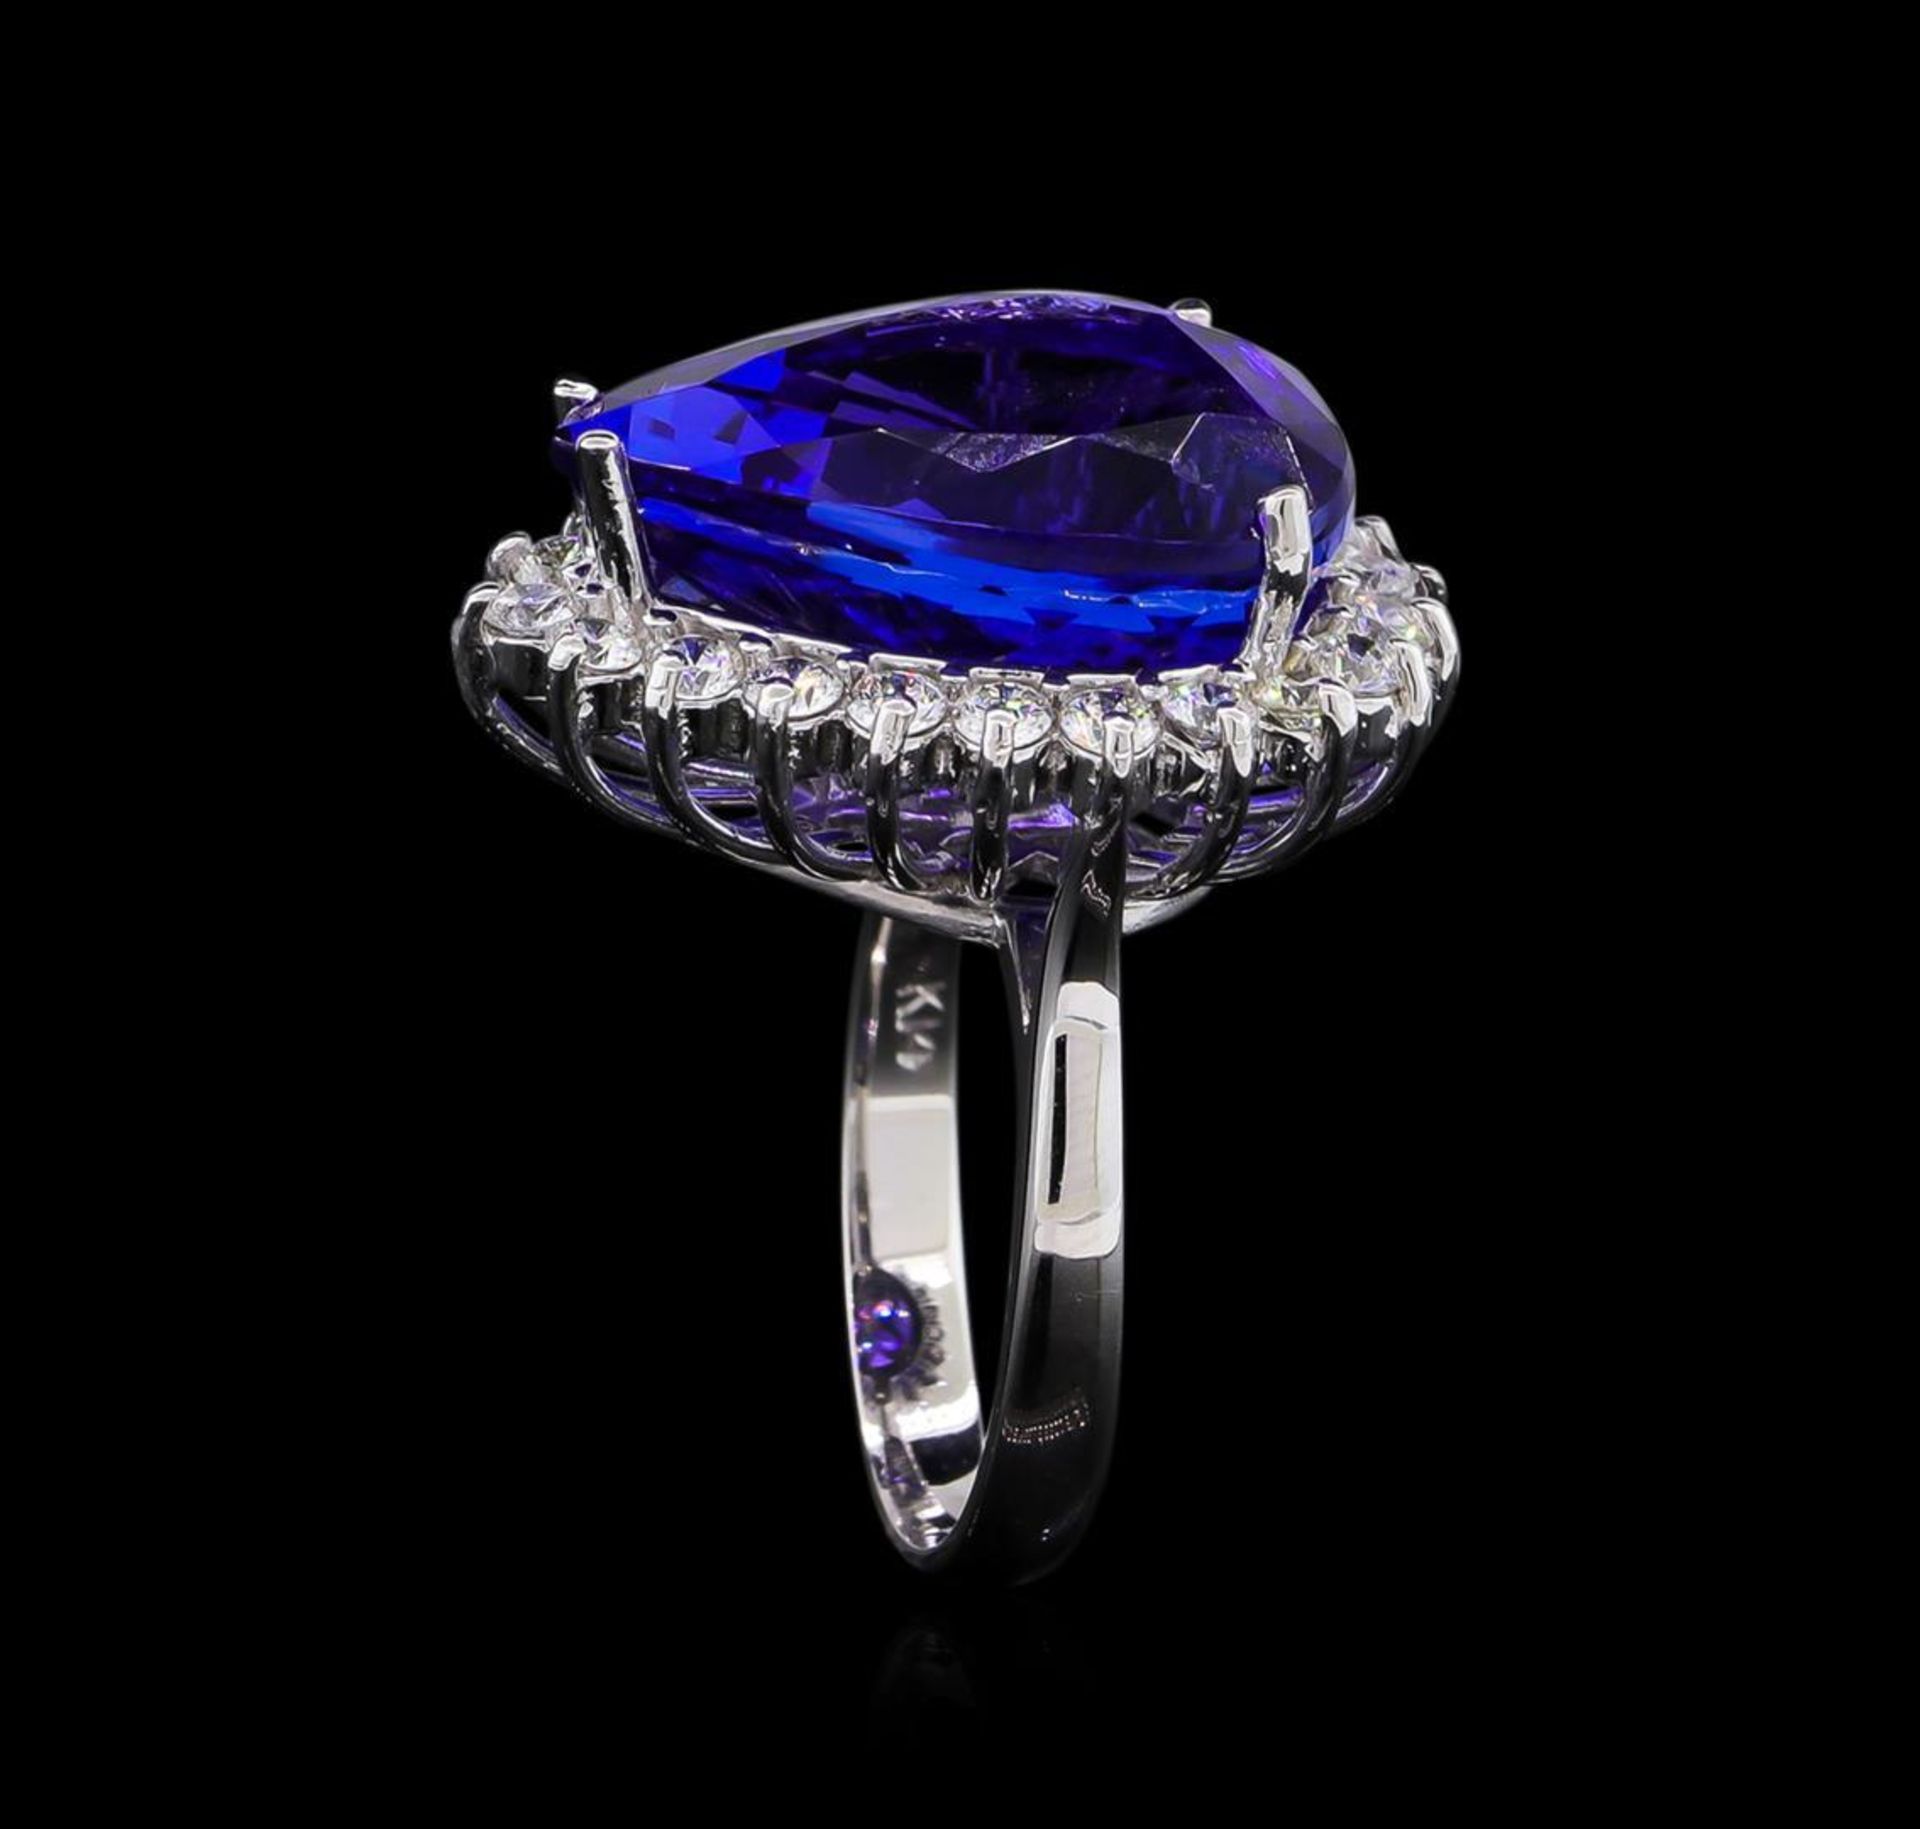 14KT White Gold GIA Certified 16.98 ctw Tanzanite and Diamond Ring - Image 4 of 6